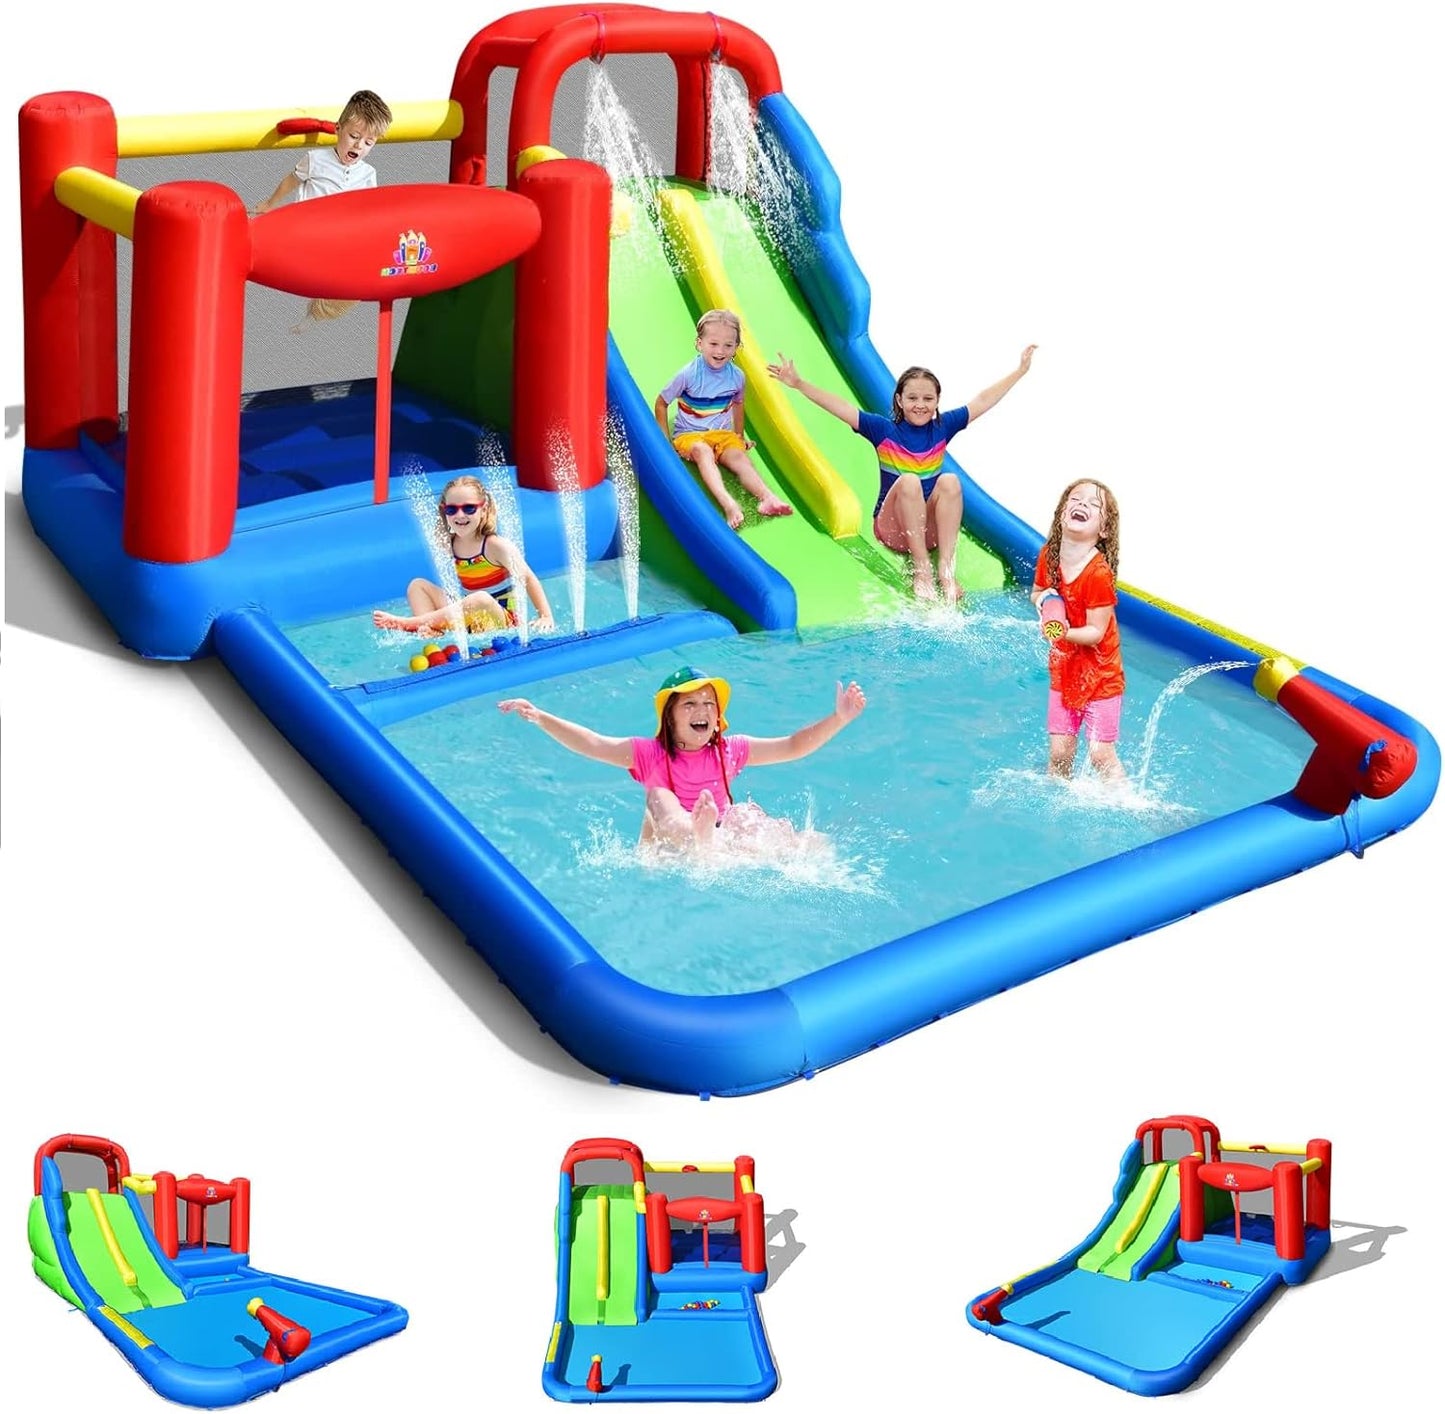 Inflatable Water Slide, 8 in 1 Mega Waterslide Park Bounce House for Outdoor Fun W/735W Blower, Long Slide, Splash Pool, Water Slides Inflatables for Kids and Adults Backyard Party Gifts